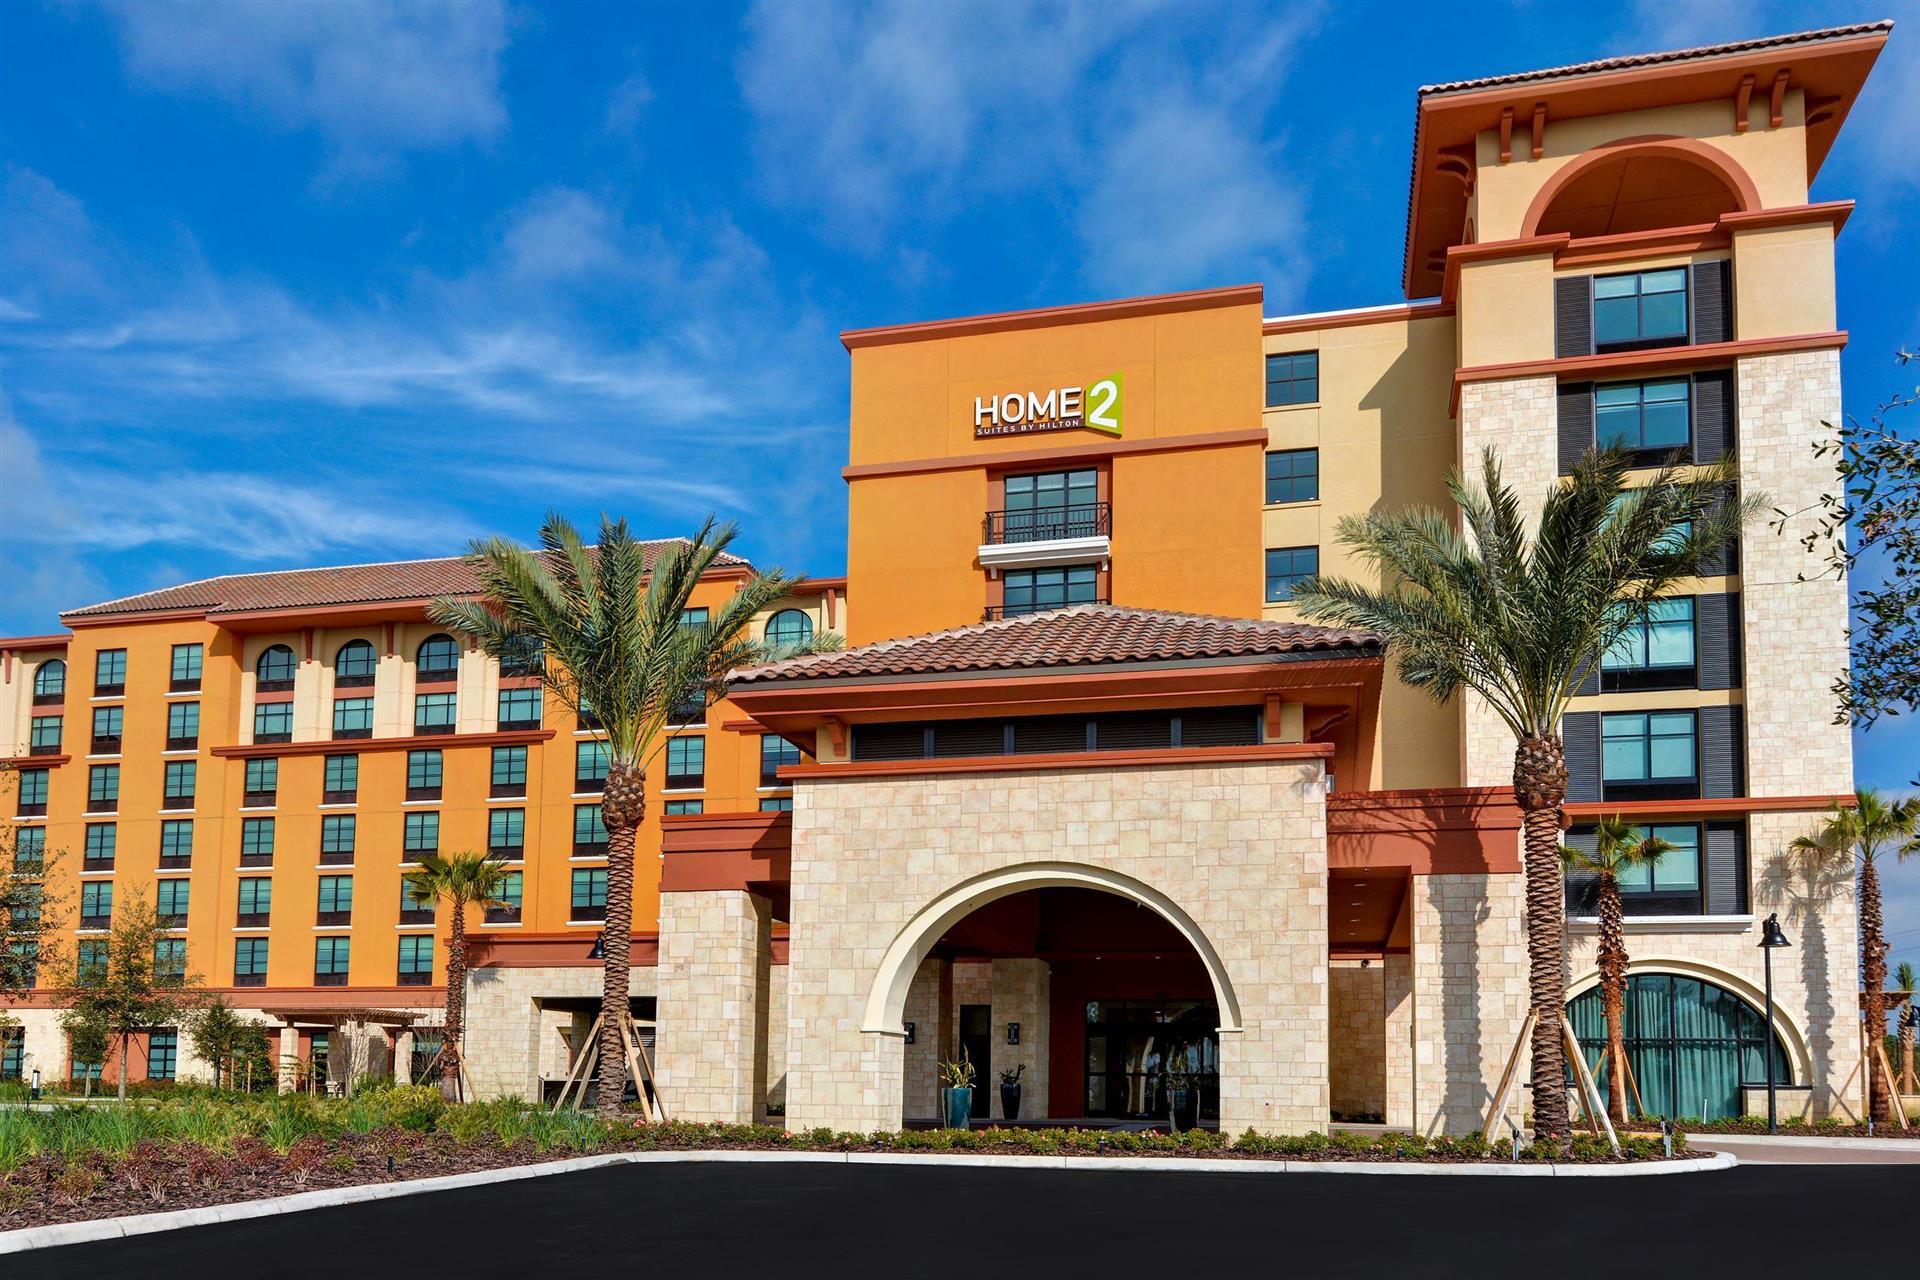 Home2 Suites by Hilton Orlando at FLAMINGO CROSSINGS Town Center in Winter Garden, FL